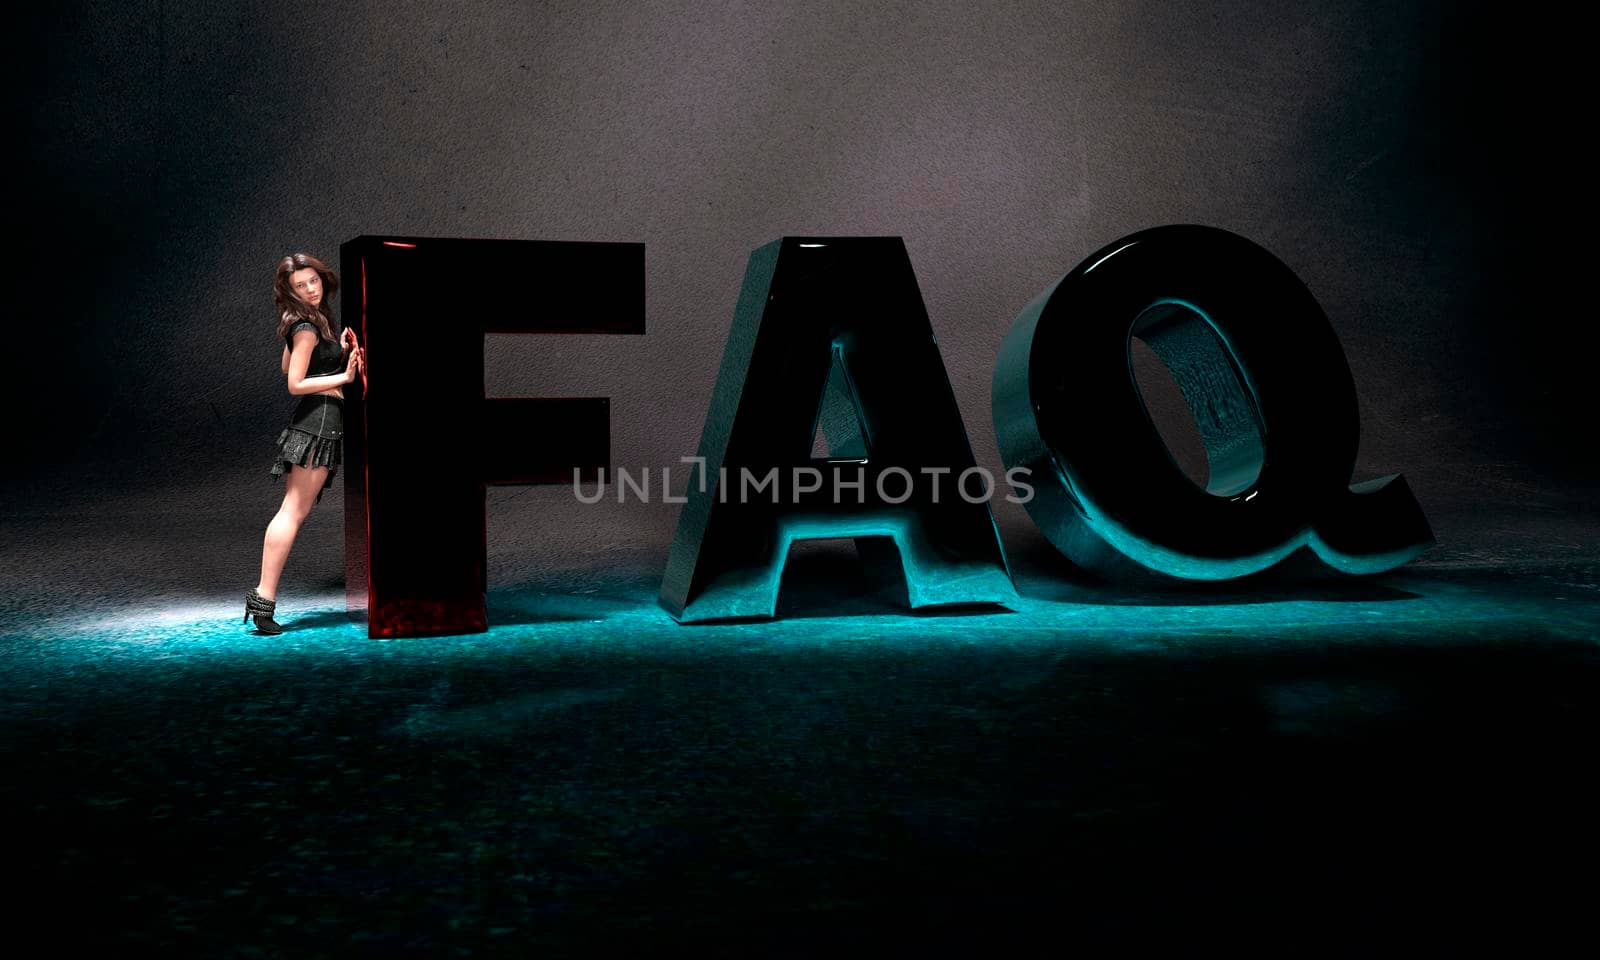 Girl leaning on FAQ text at dark background. Three-dimensional rendering with shadows and reflections - 3d rendering